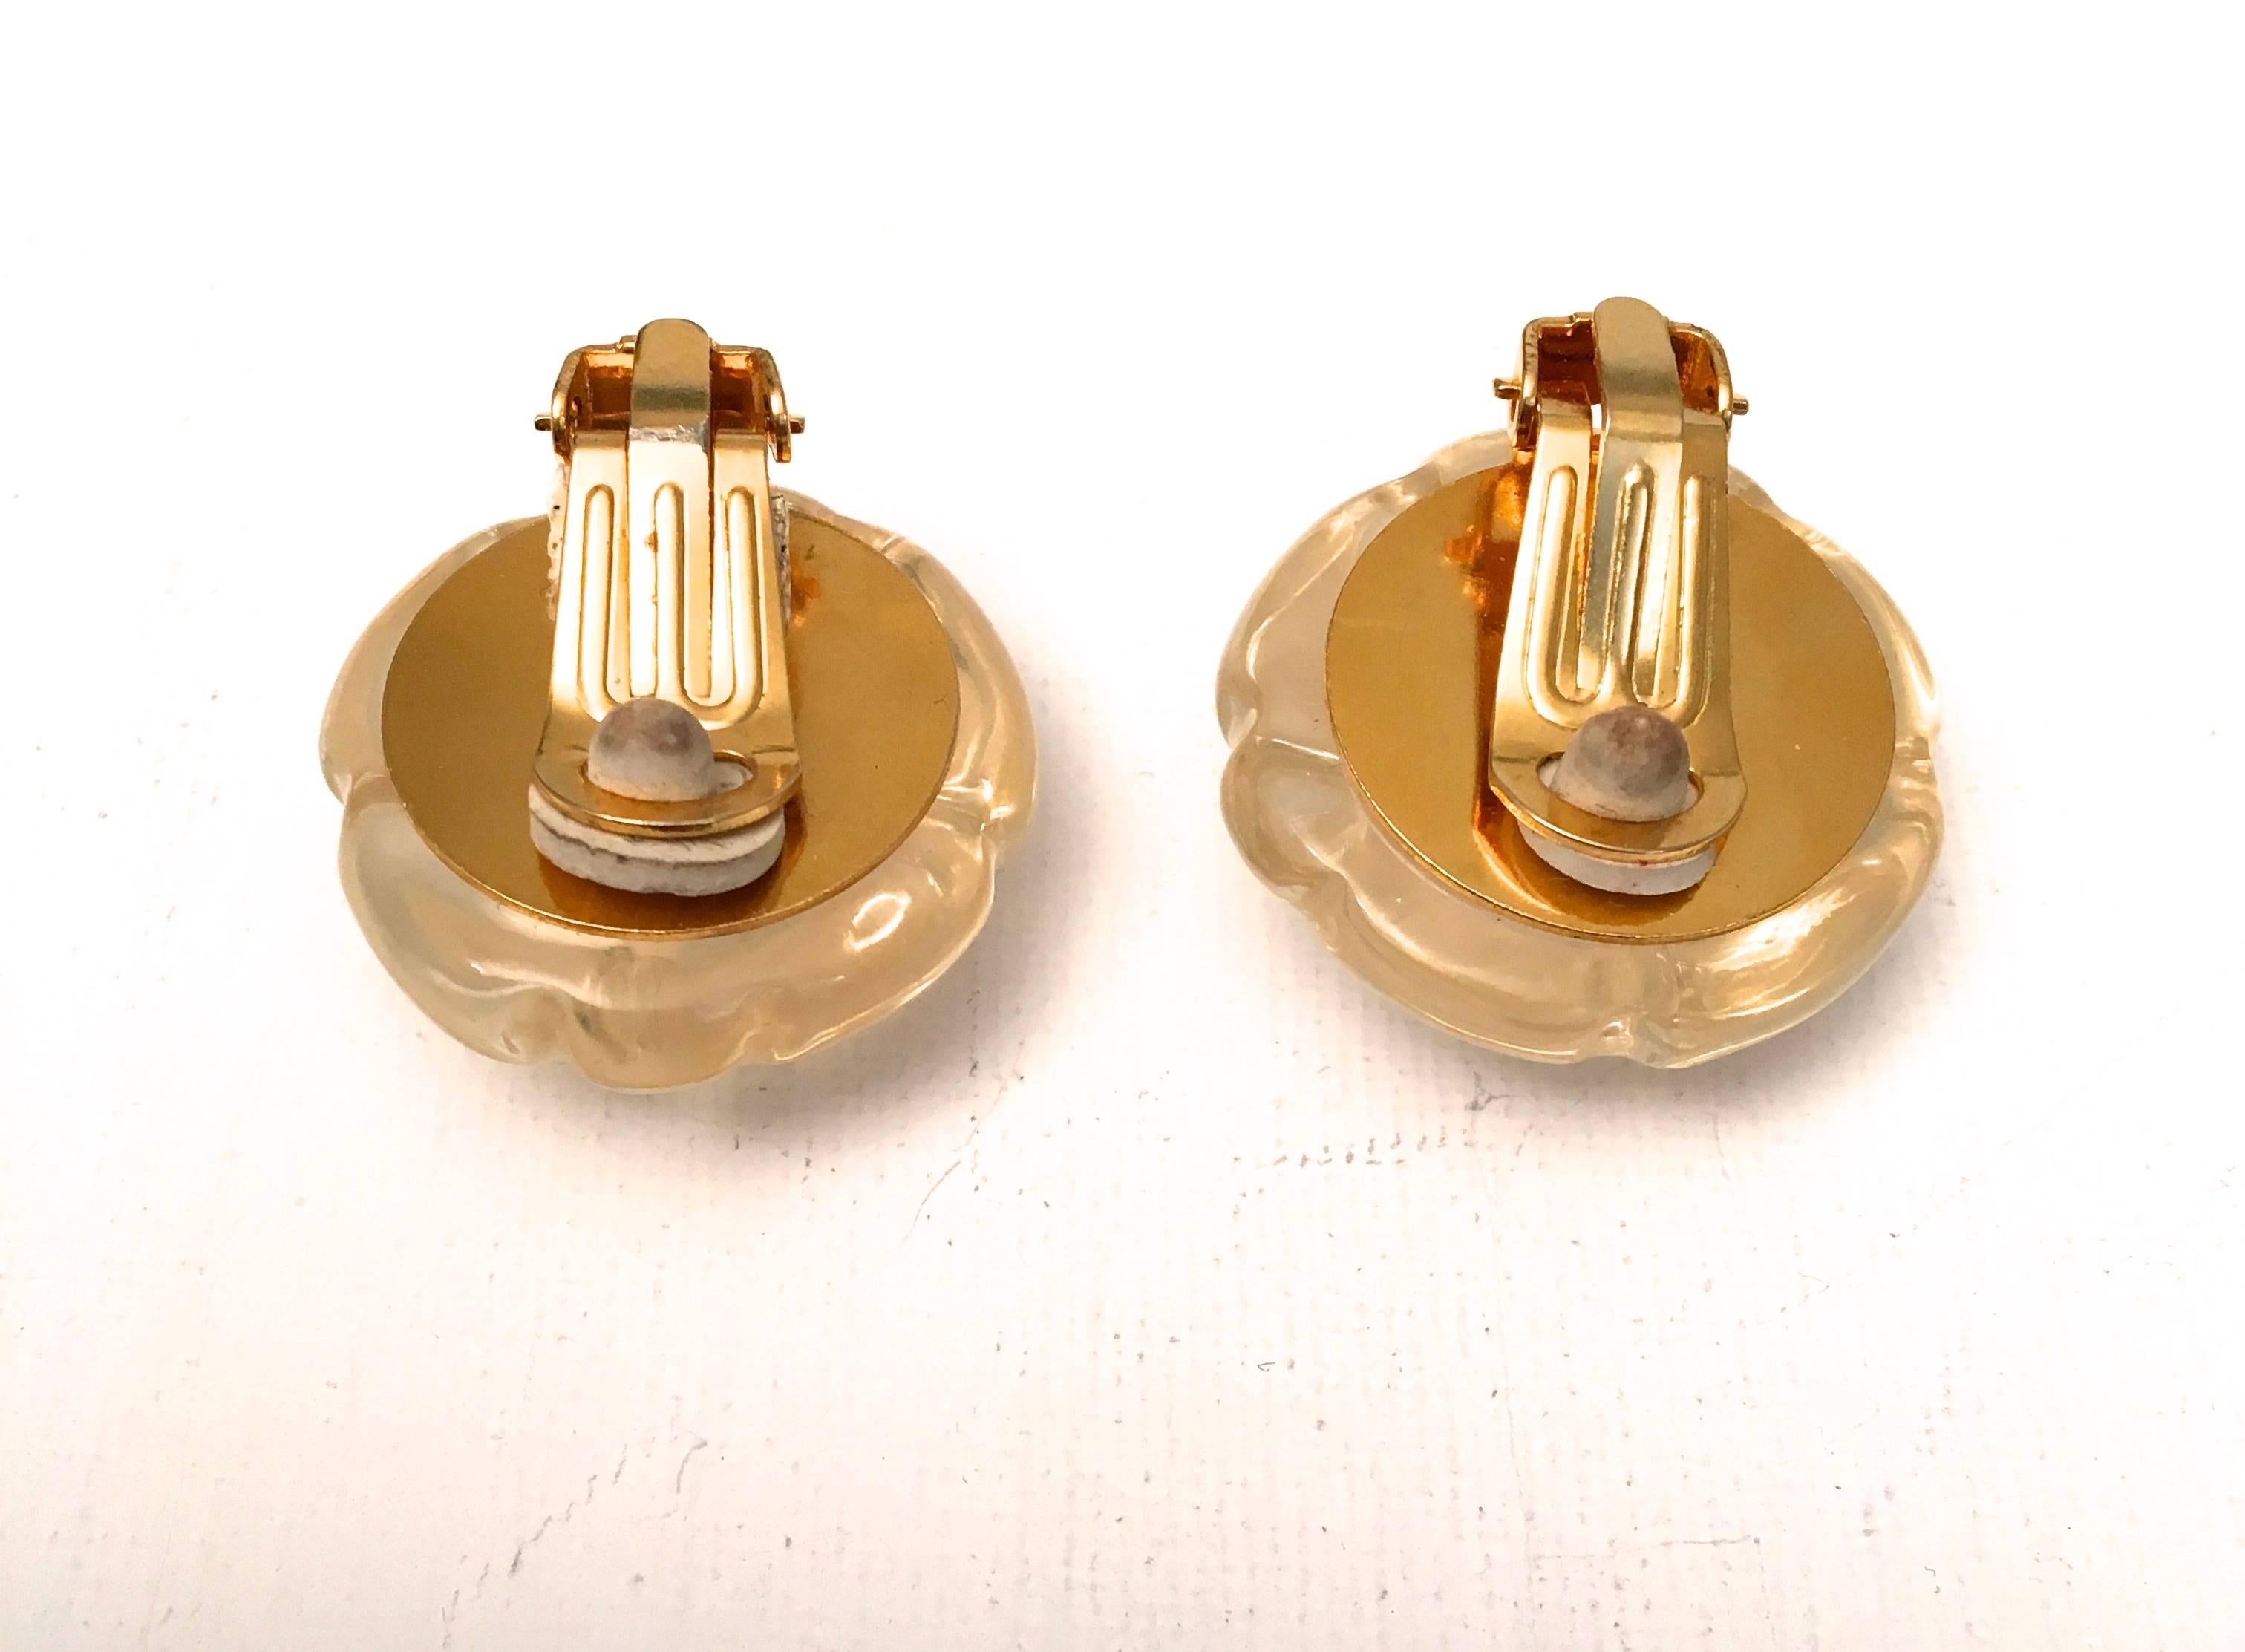 Vintage Chanel Earrings - Camellia Flower In Excellent Condition For Sale In Boca Raton, FL